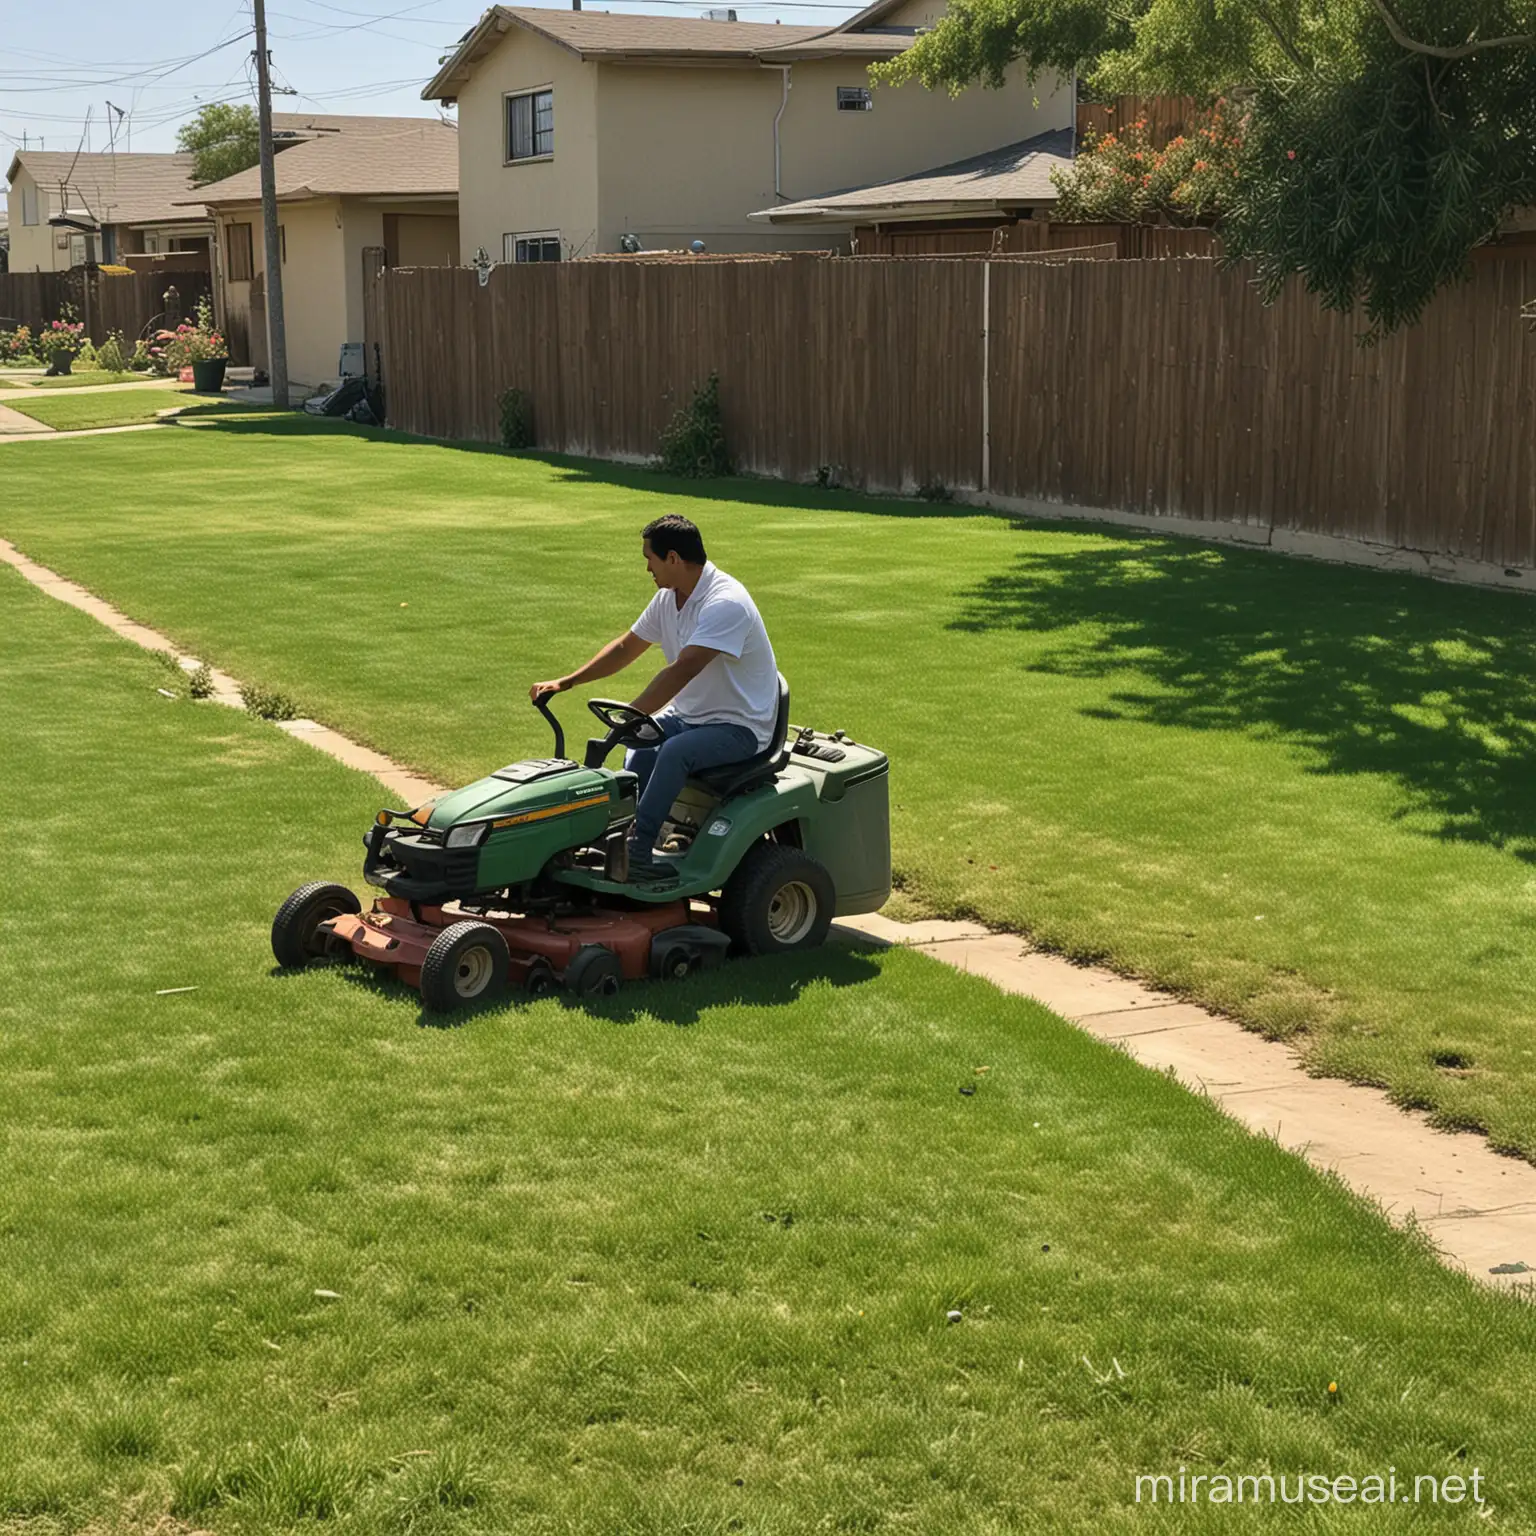 Mexicans mowing the neighborhood lawn